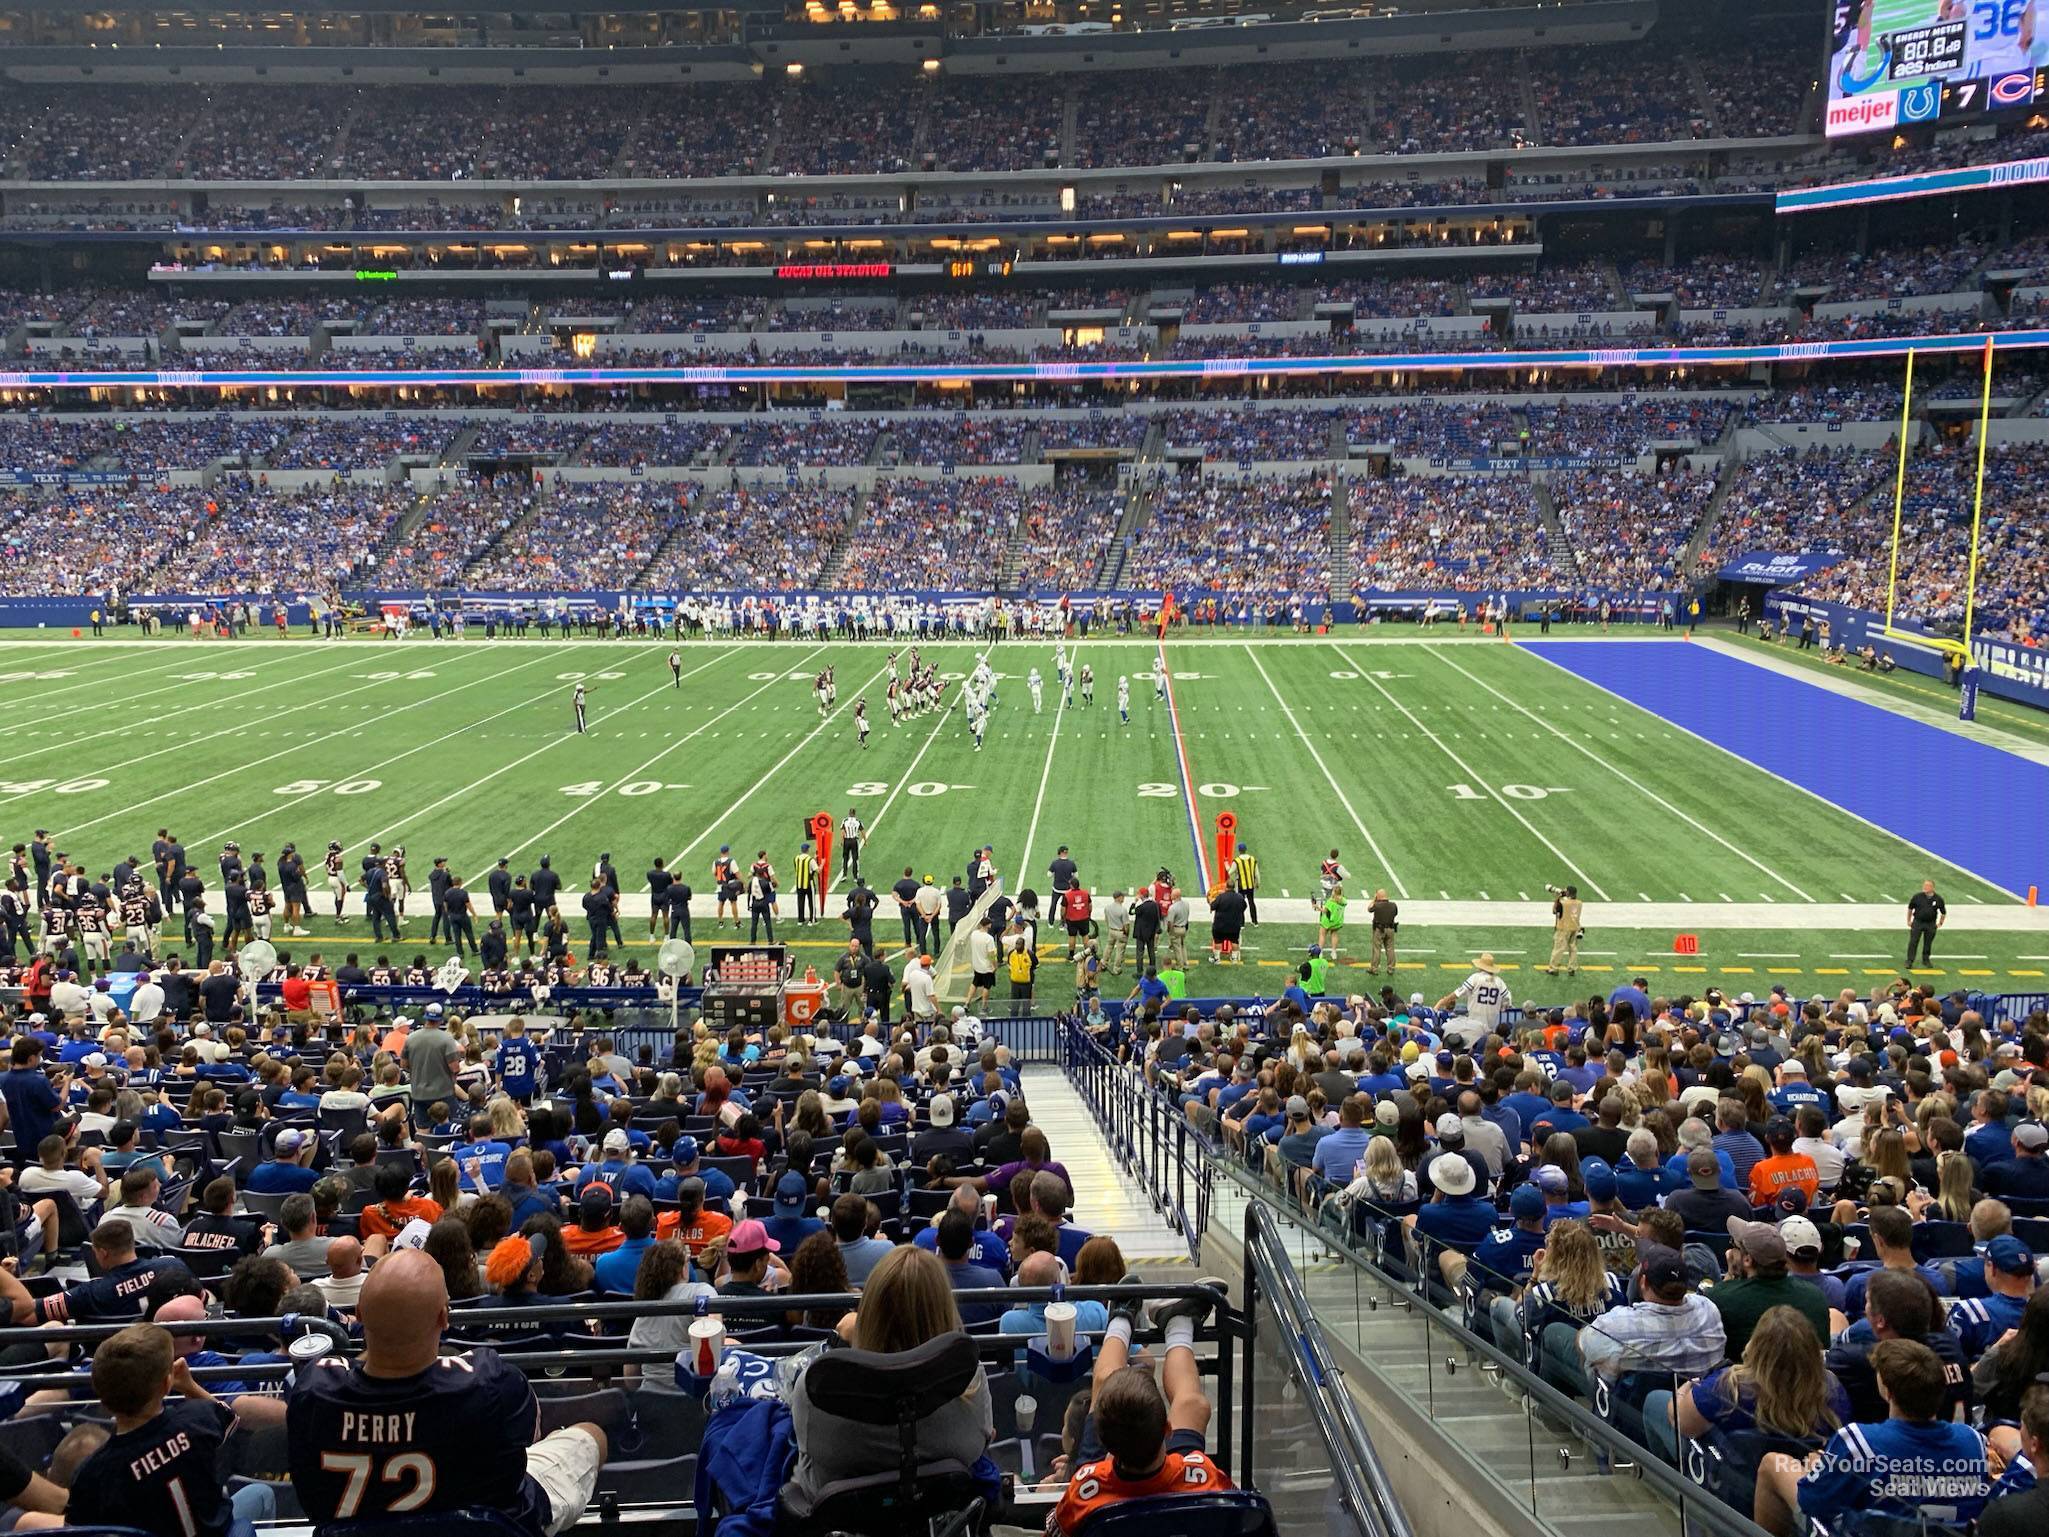 section 211, row 1 seat view  for football - lucas oil stadium